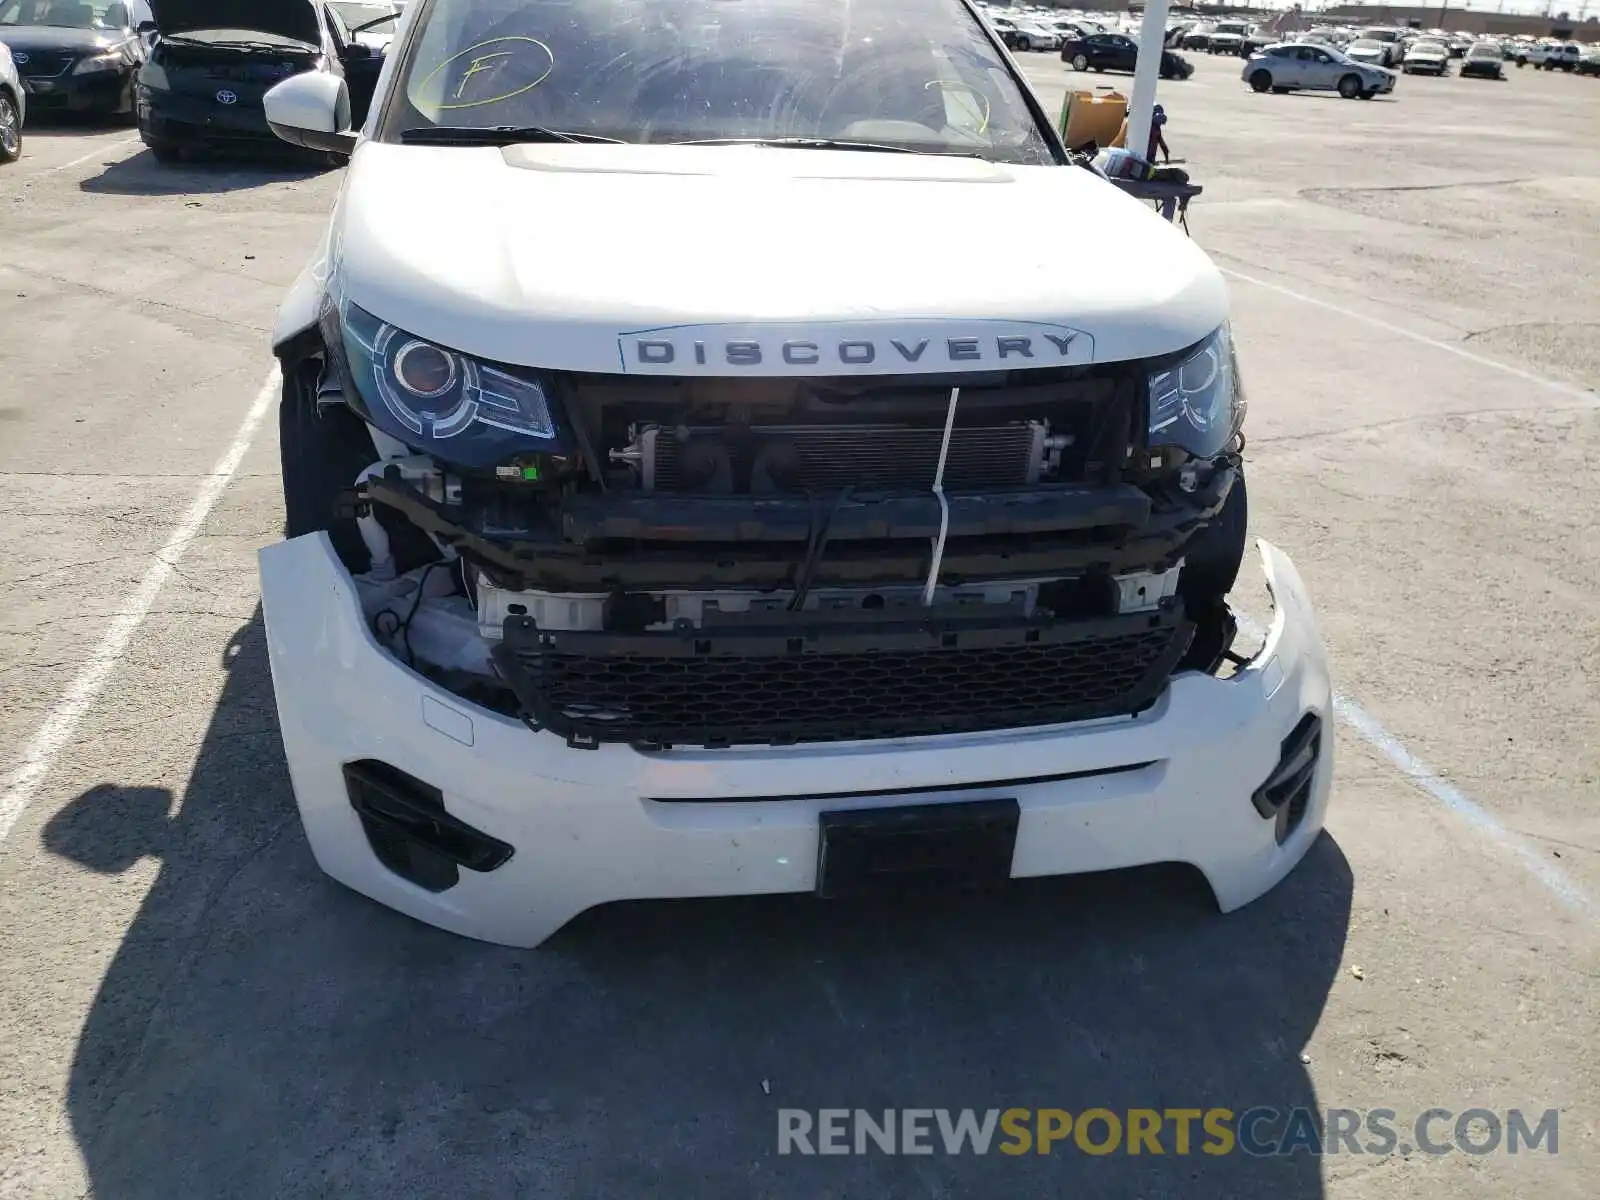 9 Photograph of a damaged car SALCR2FX6KH812905 LAND ROVER DISCOVERY 2019